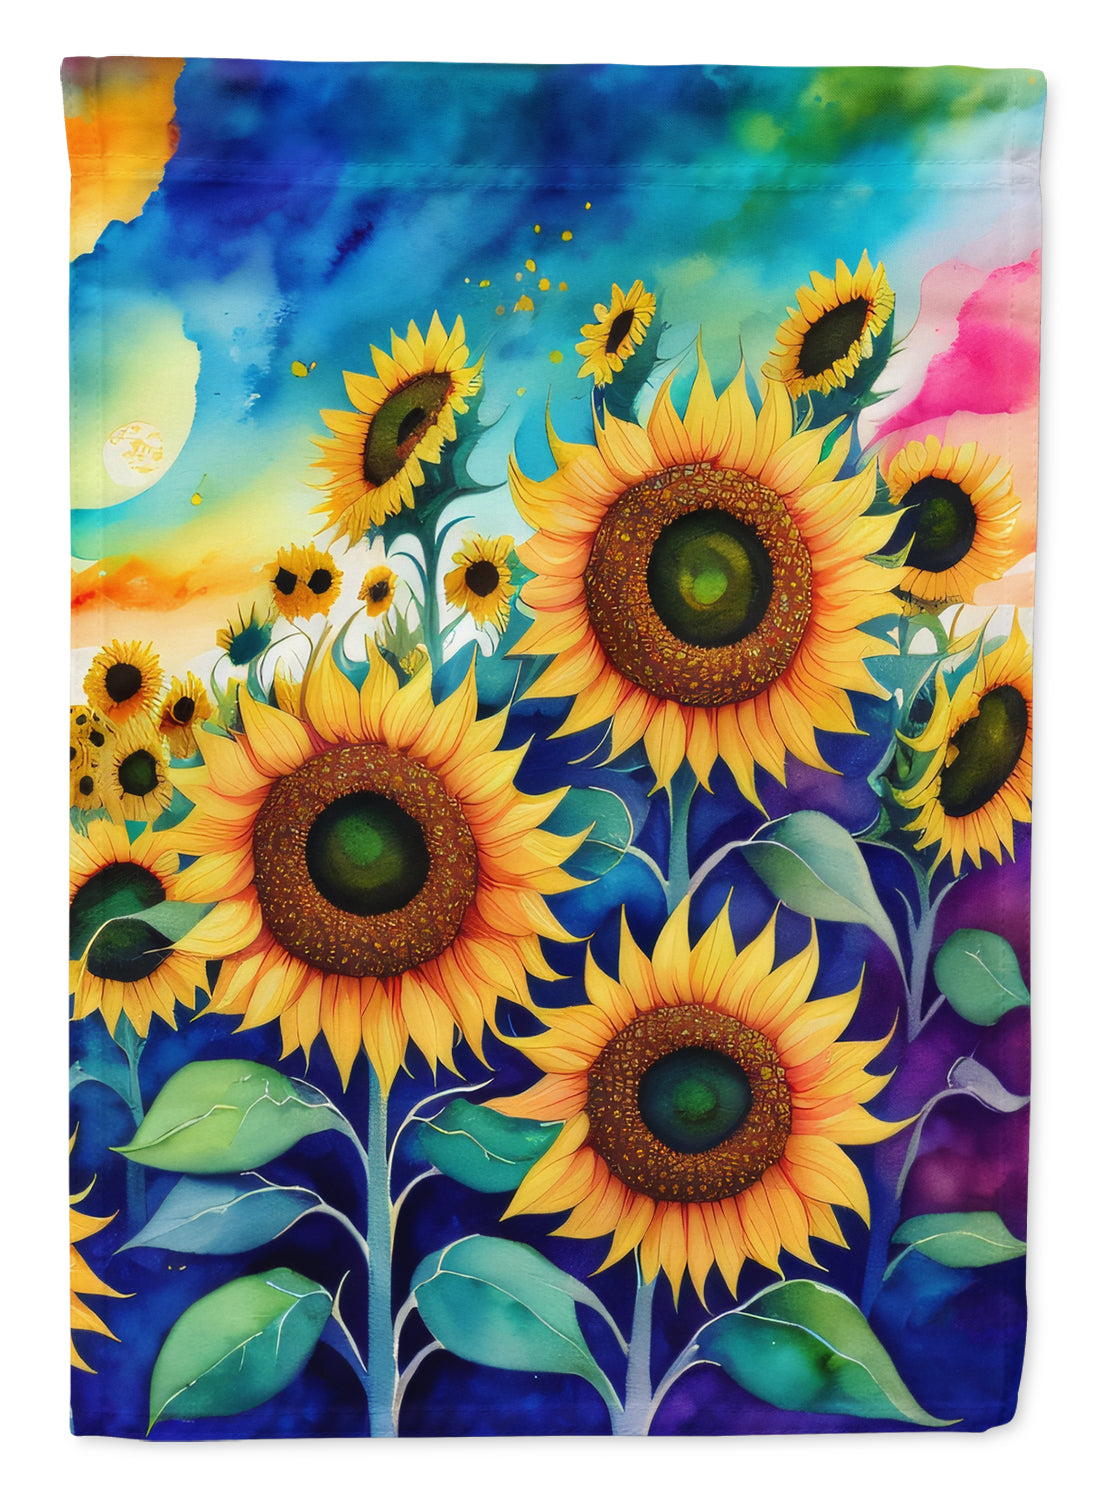 Buy this Sunflowers in Color Garden Flag